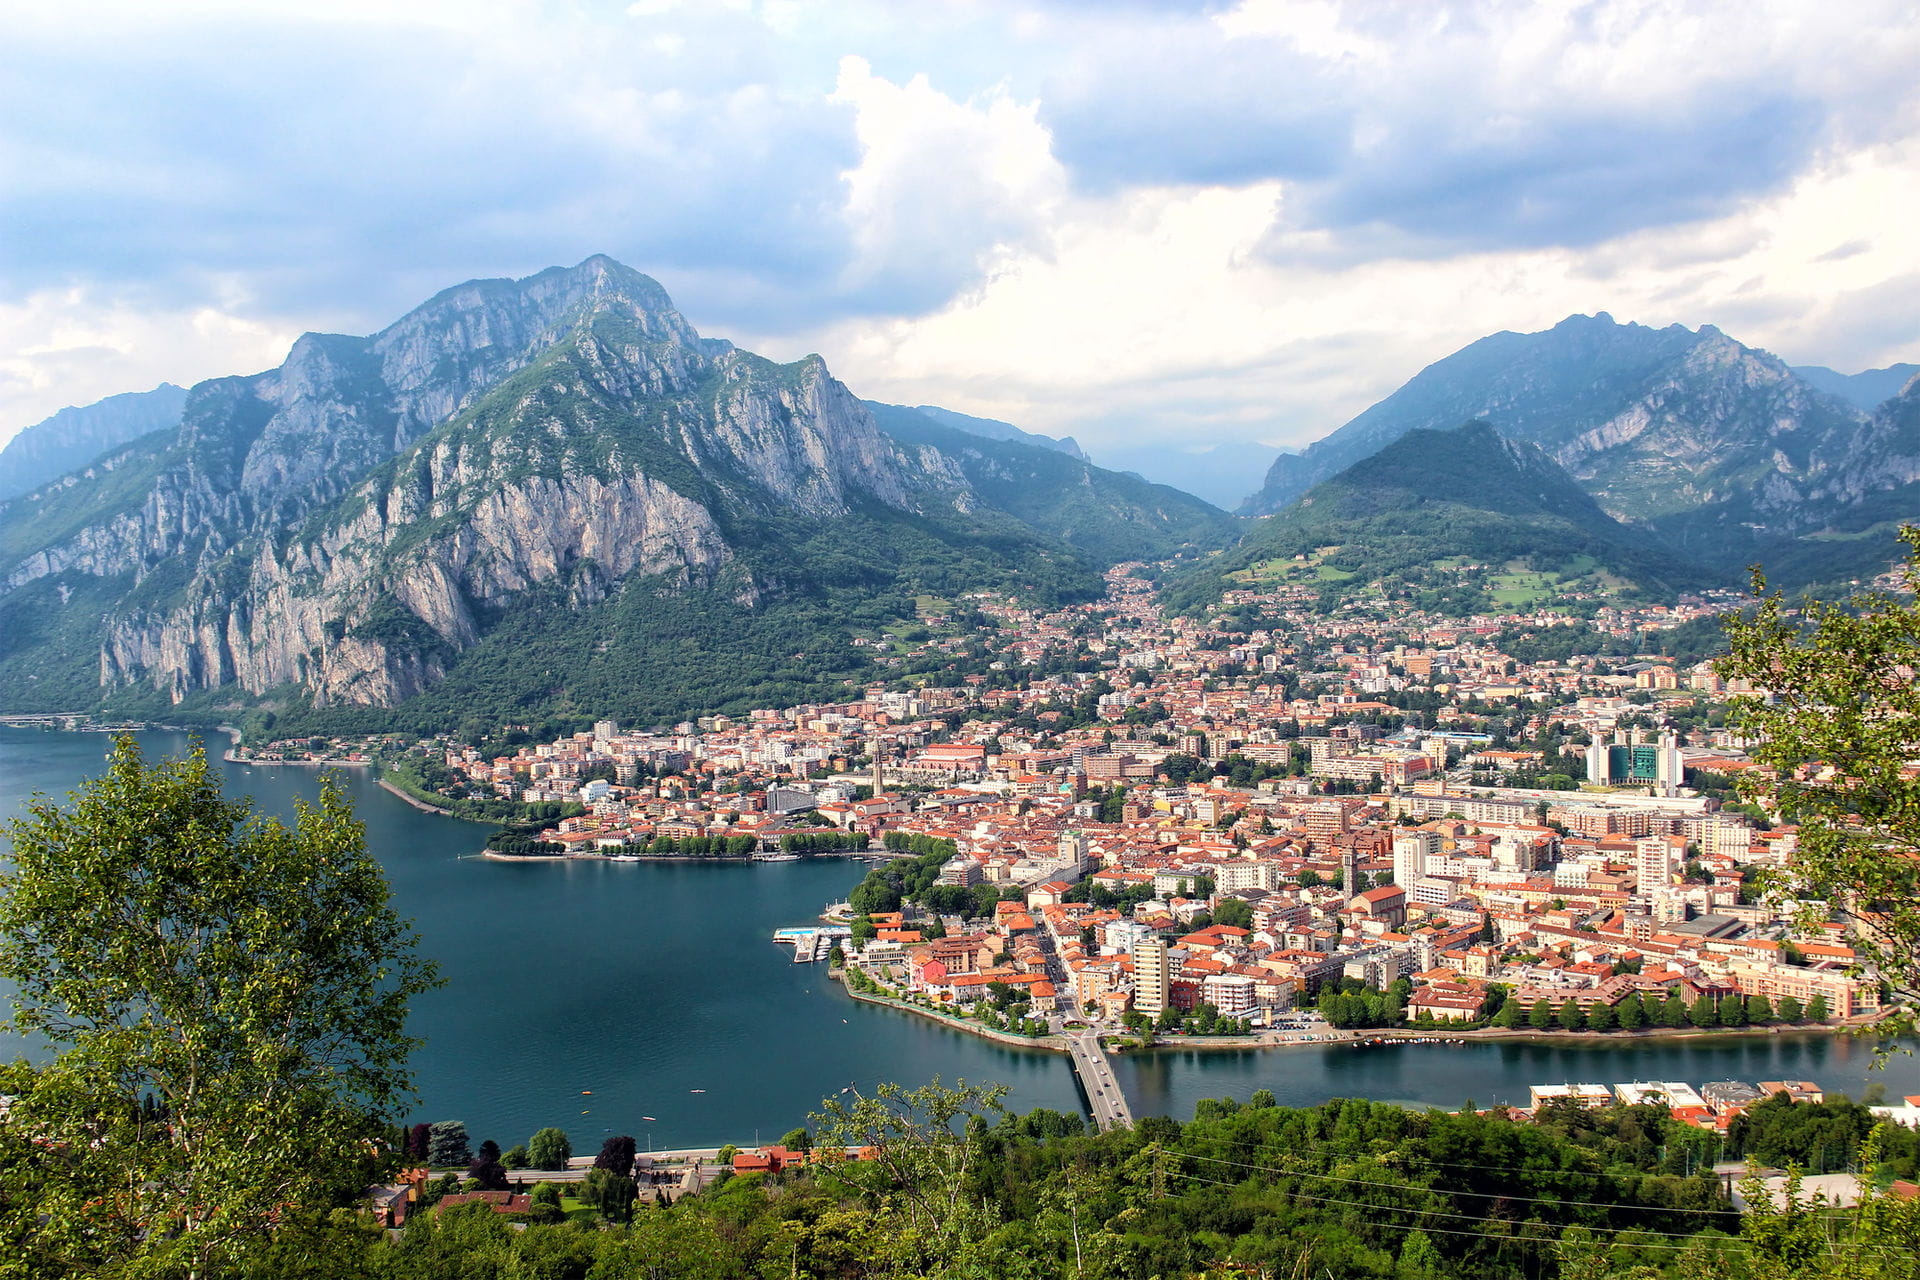 High quality hoto of Lecco - Italy